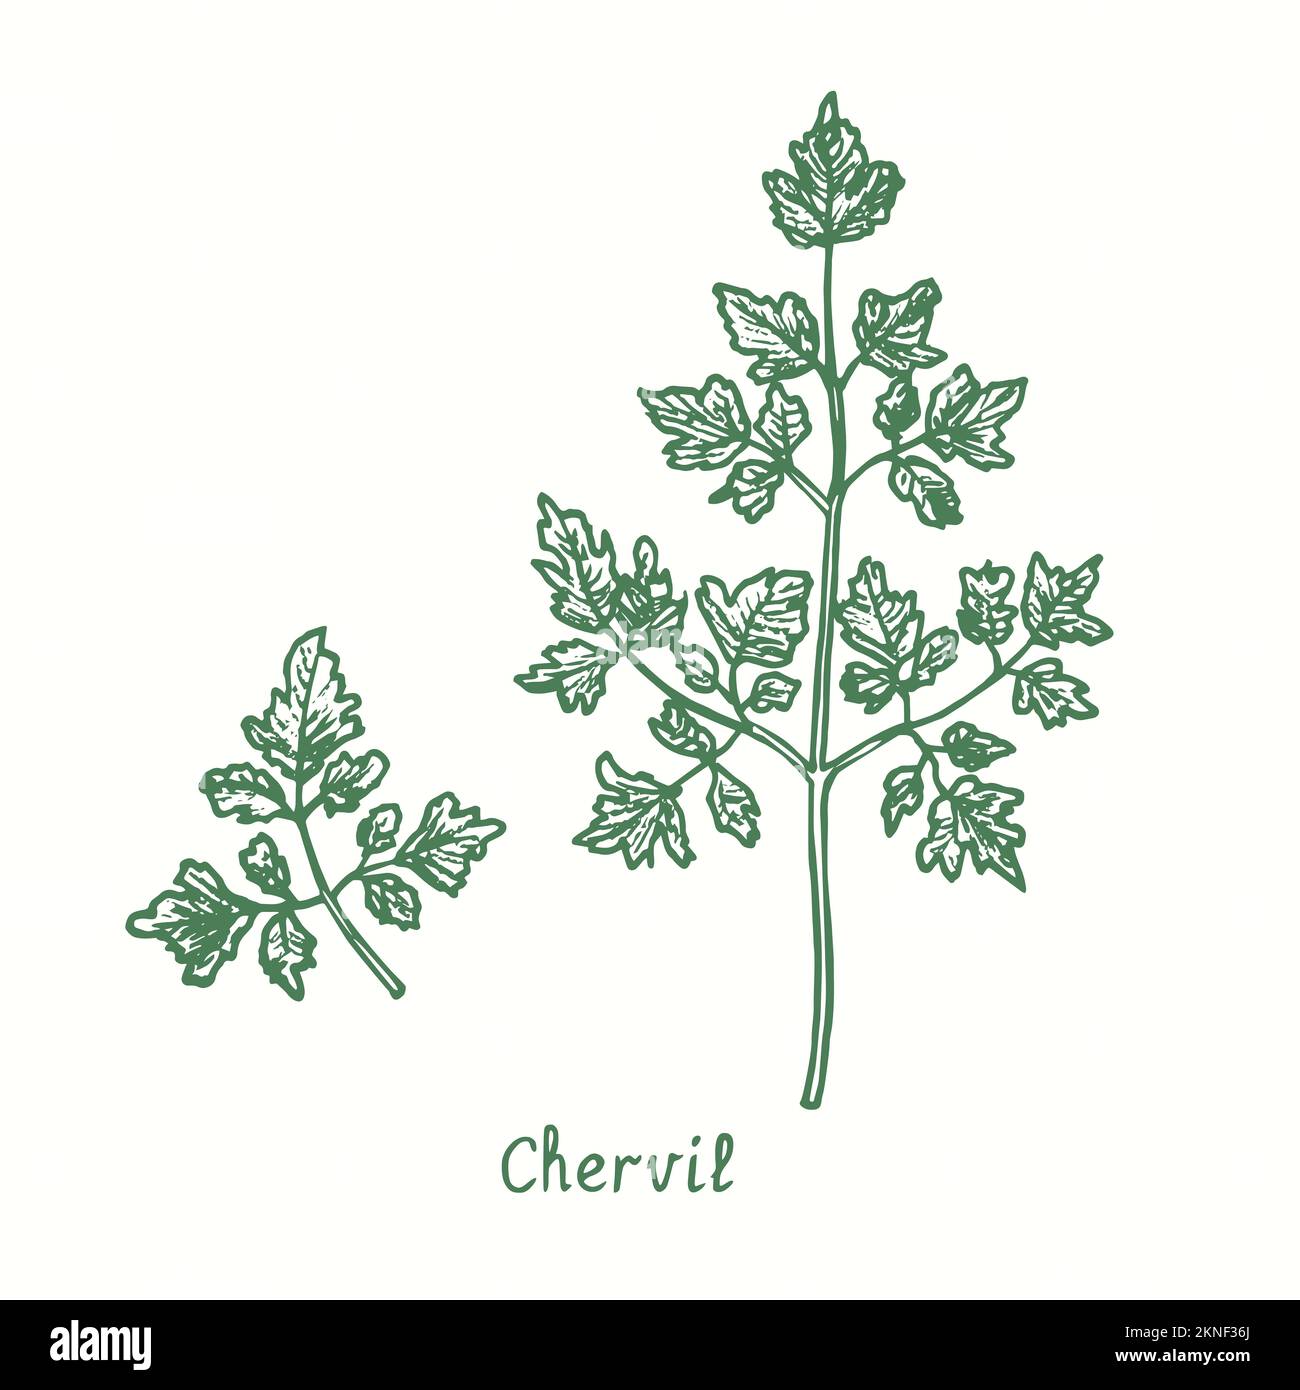 Chervil green twigs.  Ink black and white doodle drawing in woodcut style Stock Photo